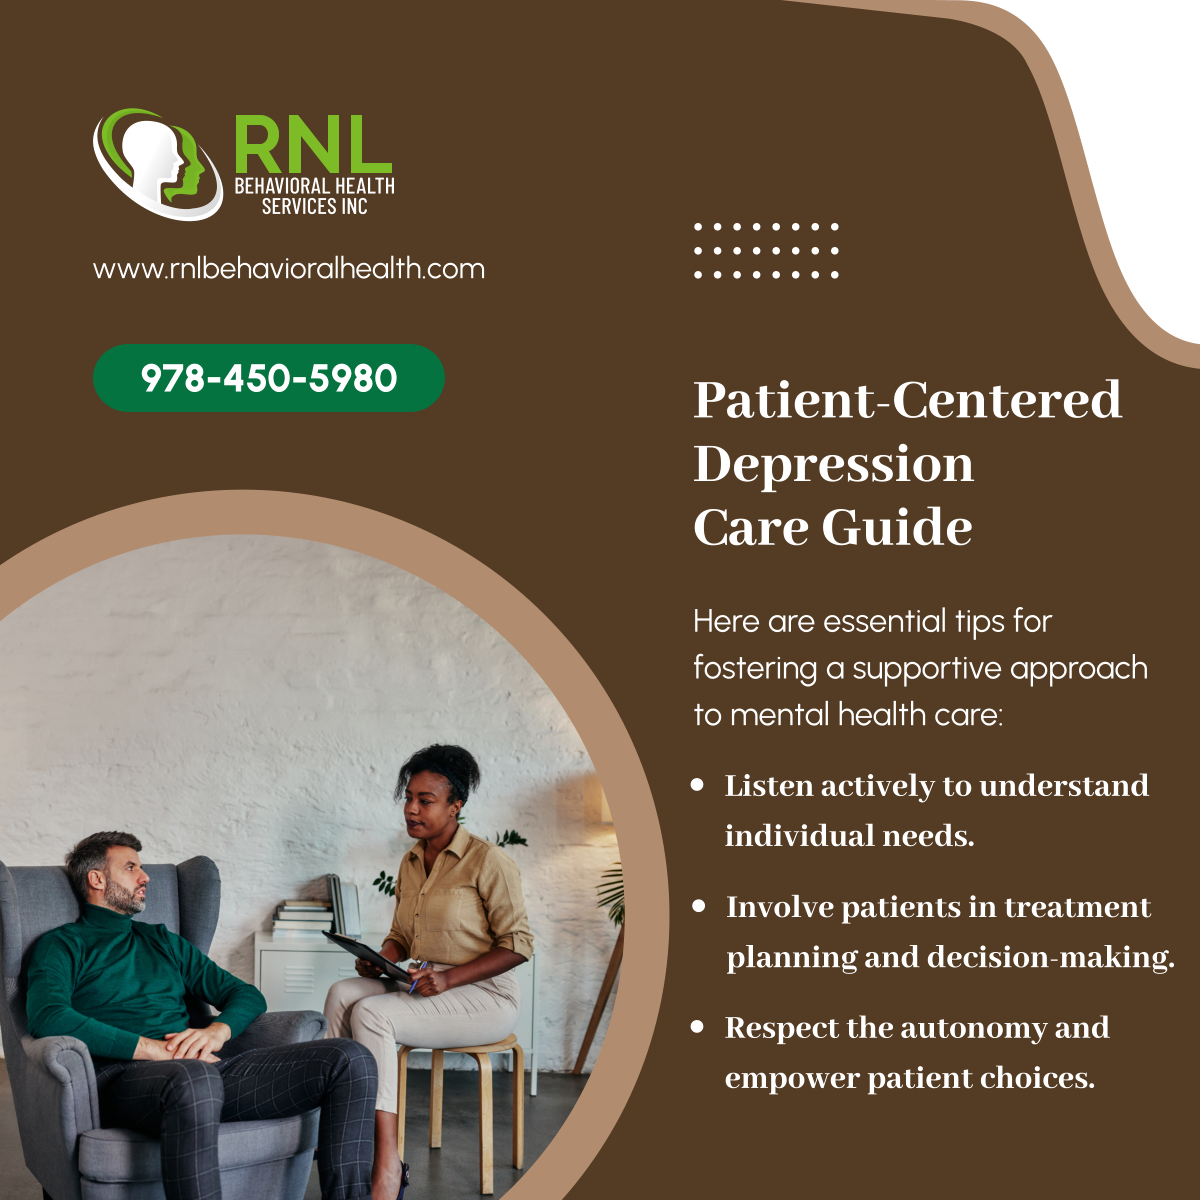 Together, let's embrace patient-centered care as a cornerstone of effective depression management. Empowerment, understanding, and collaboration pave the way to brighter mental health outcomes.

#NorthboroughMA #BehavioralHealthCare #DepressionCare #PatientCentered